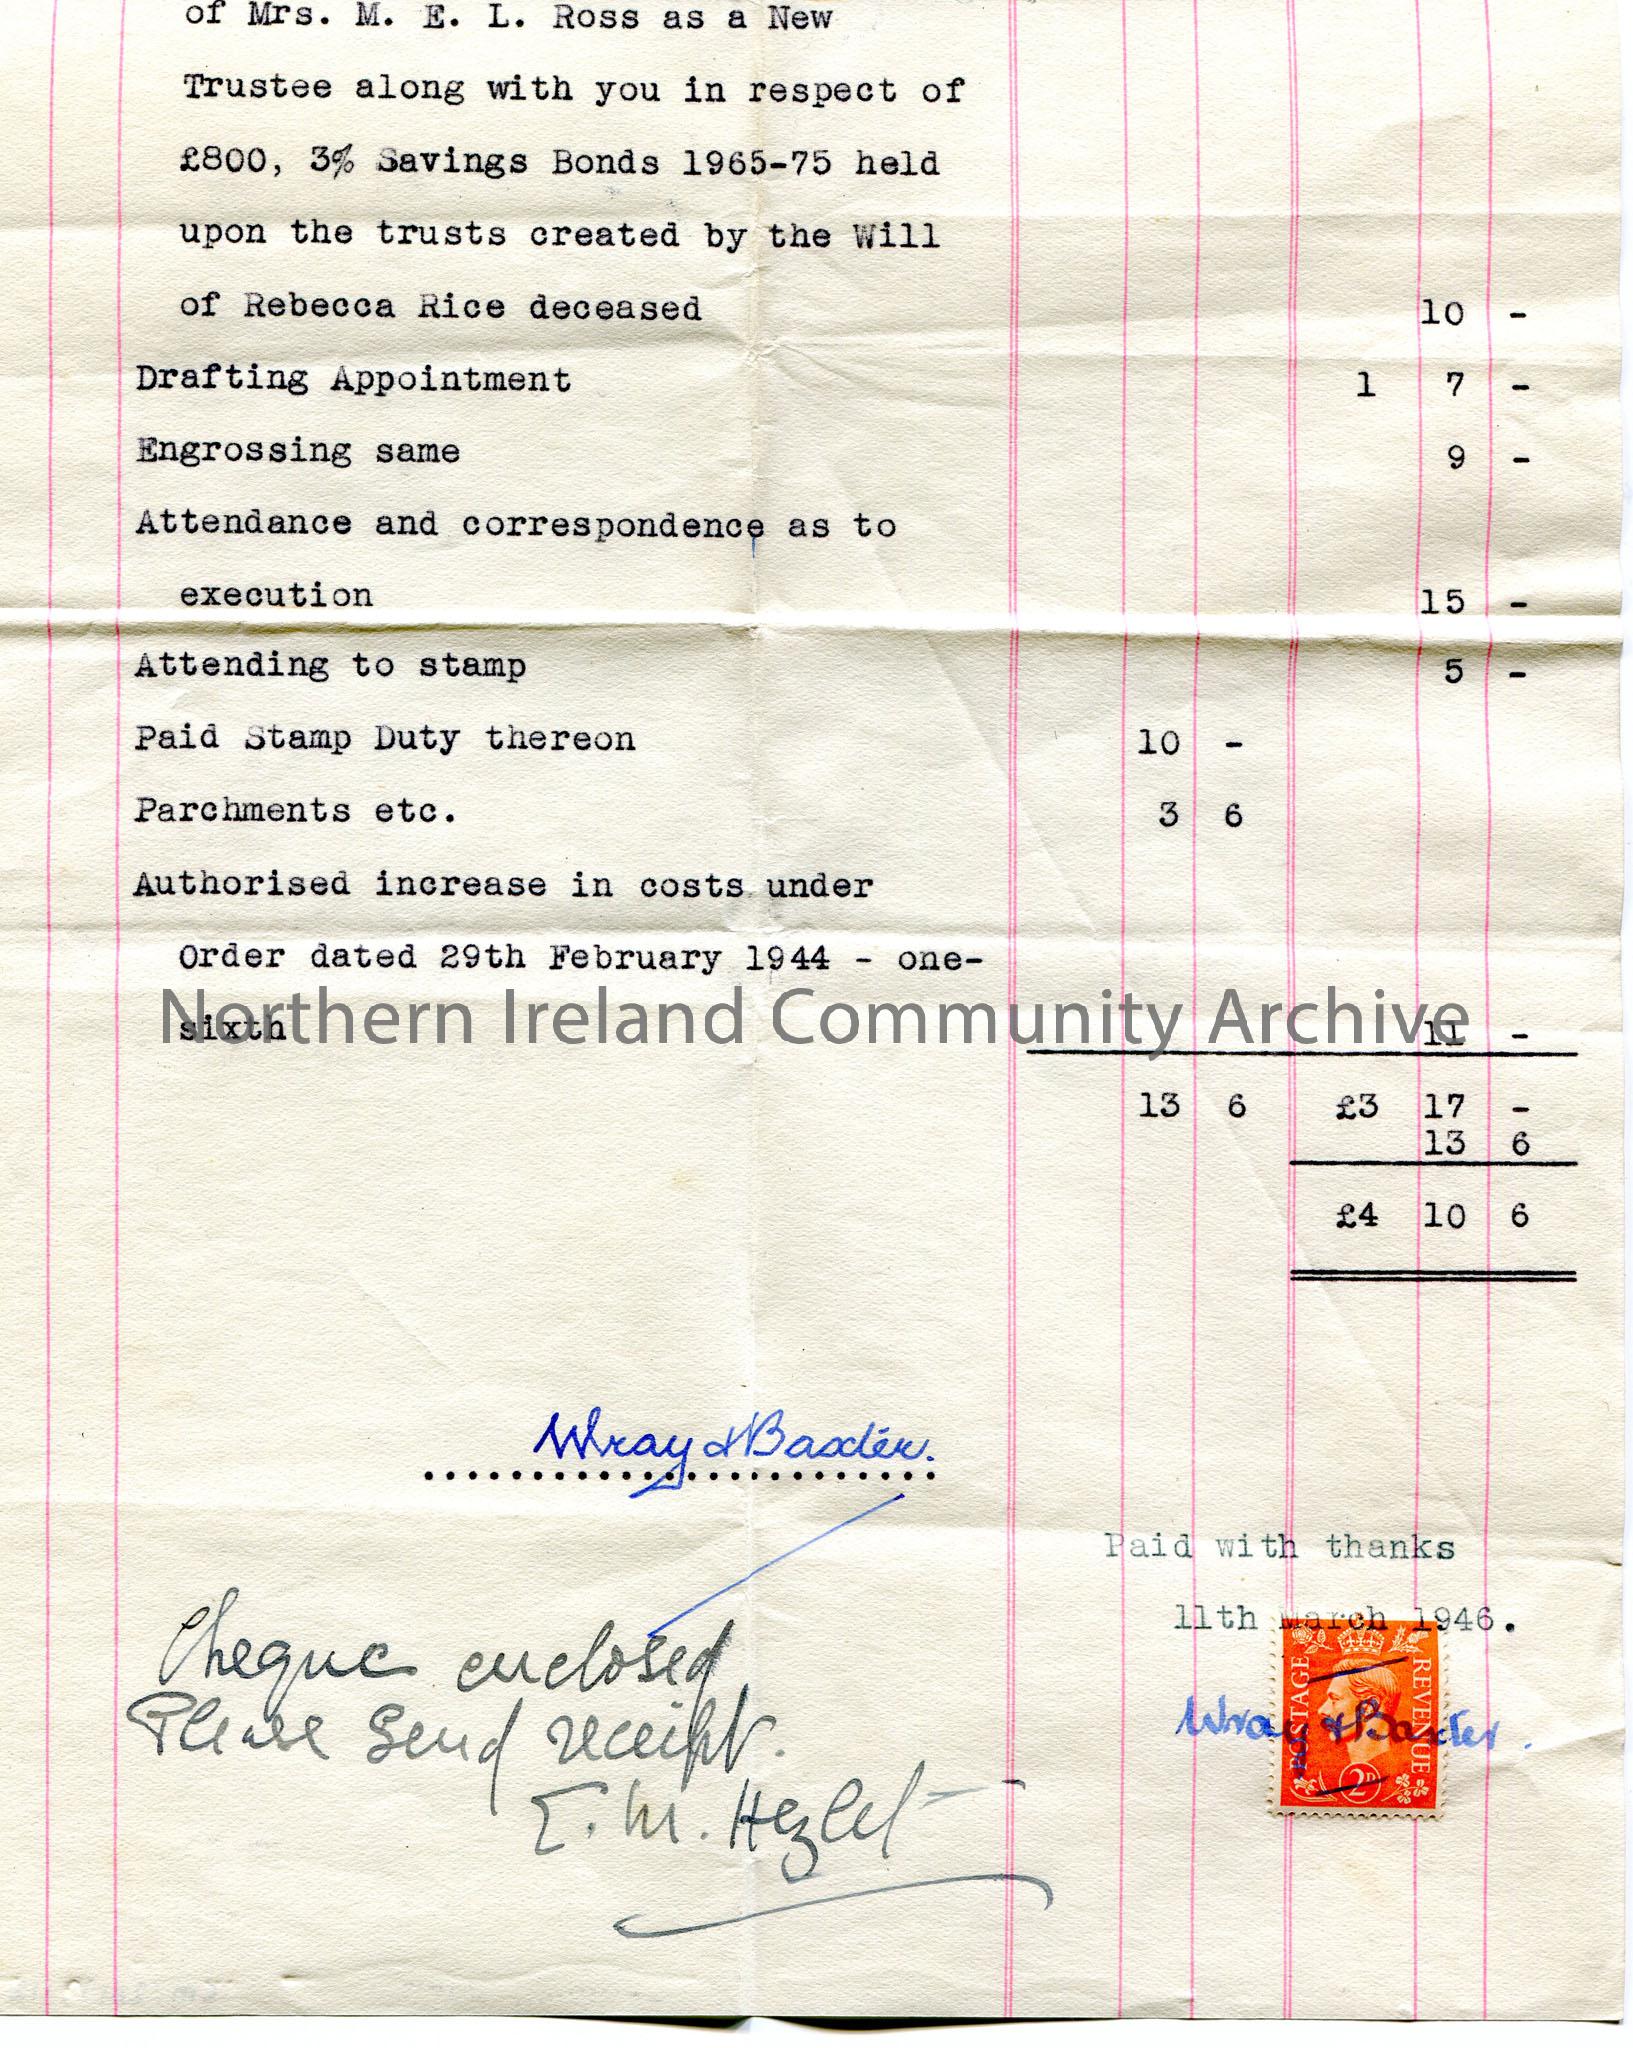 Invoice re Rice Bequest from Miss E. M. Hezlet. Dated 25th February, 1946 to Wray and Baxter Solicitors. ‘Cheque enclosed. Please send receipt’ handwr… – scan228b